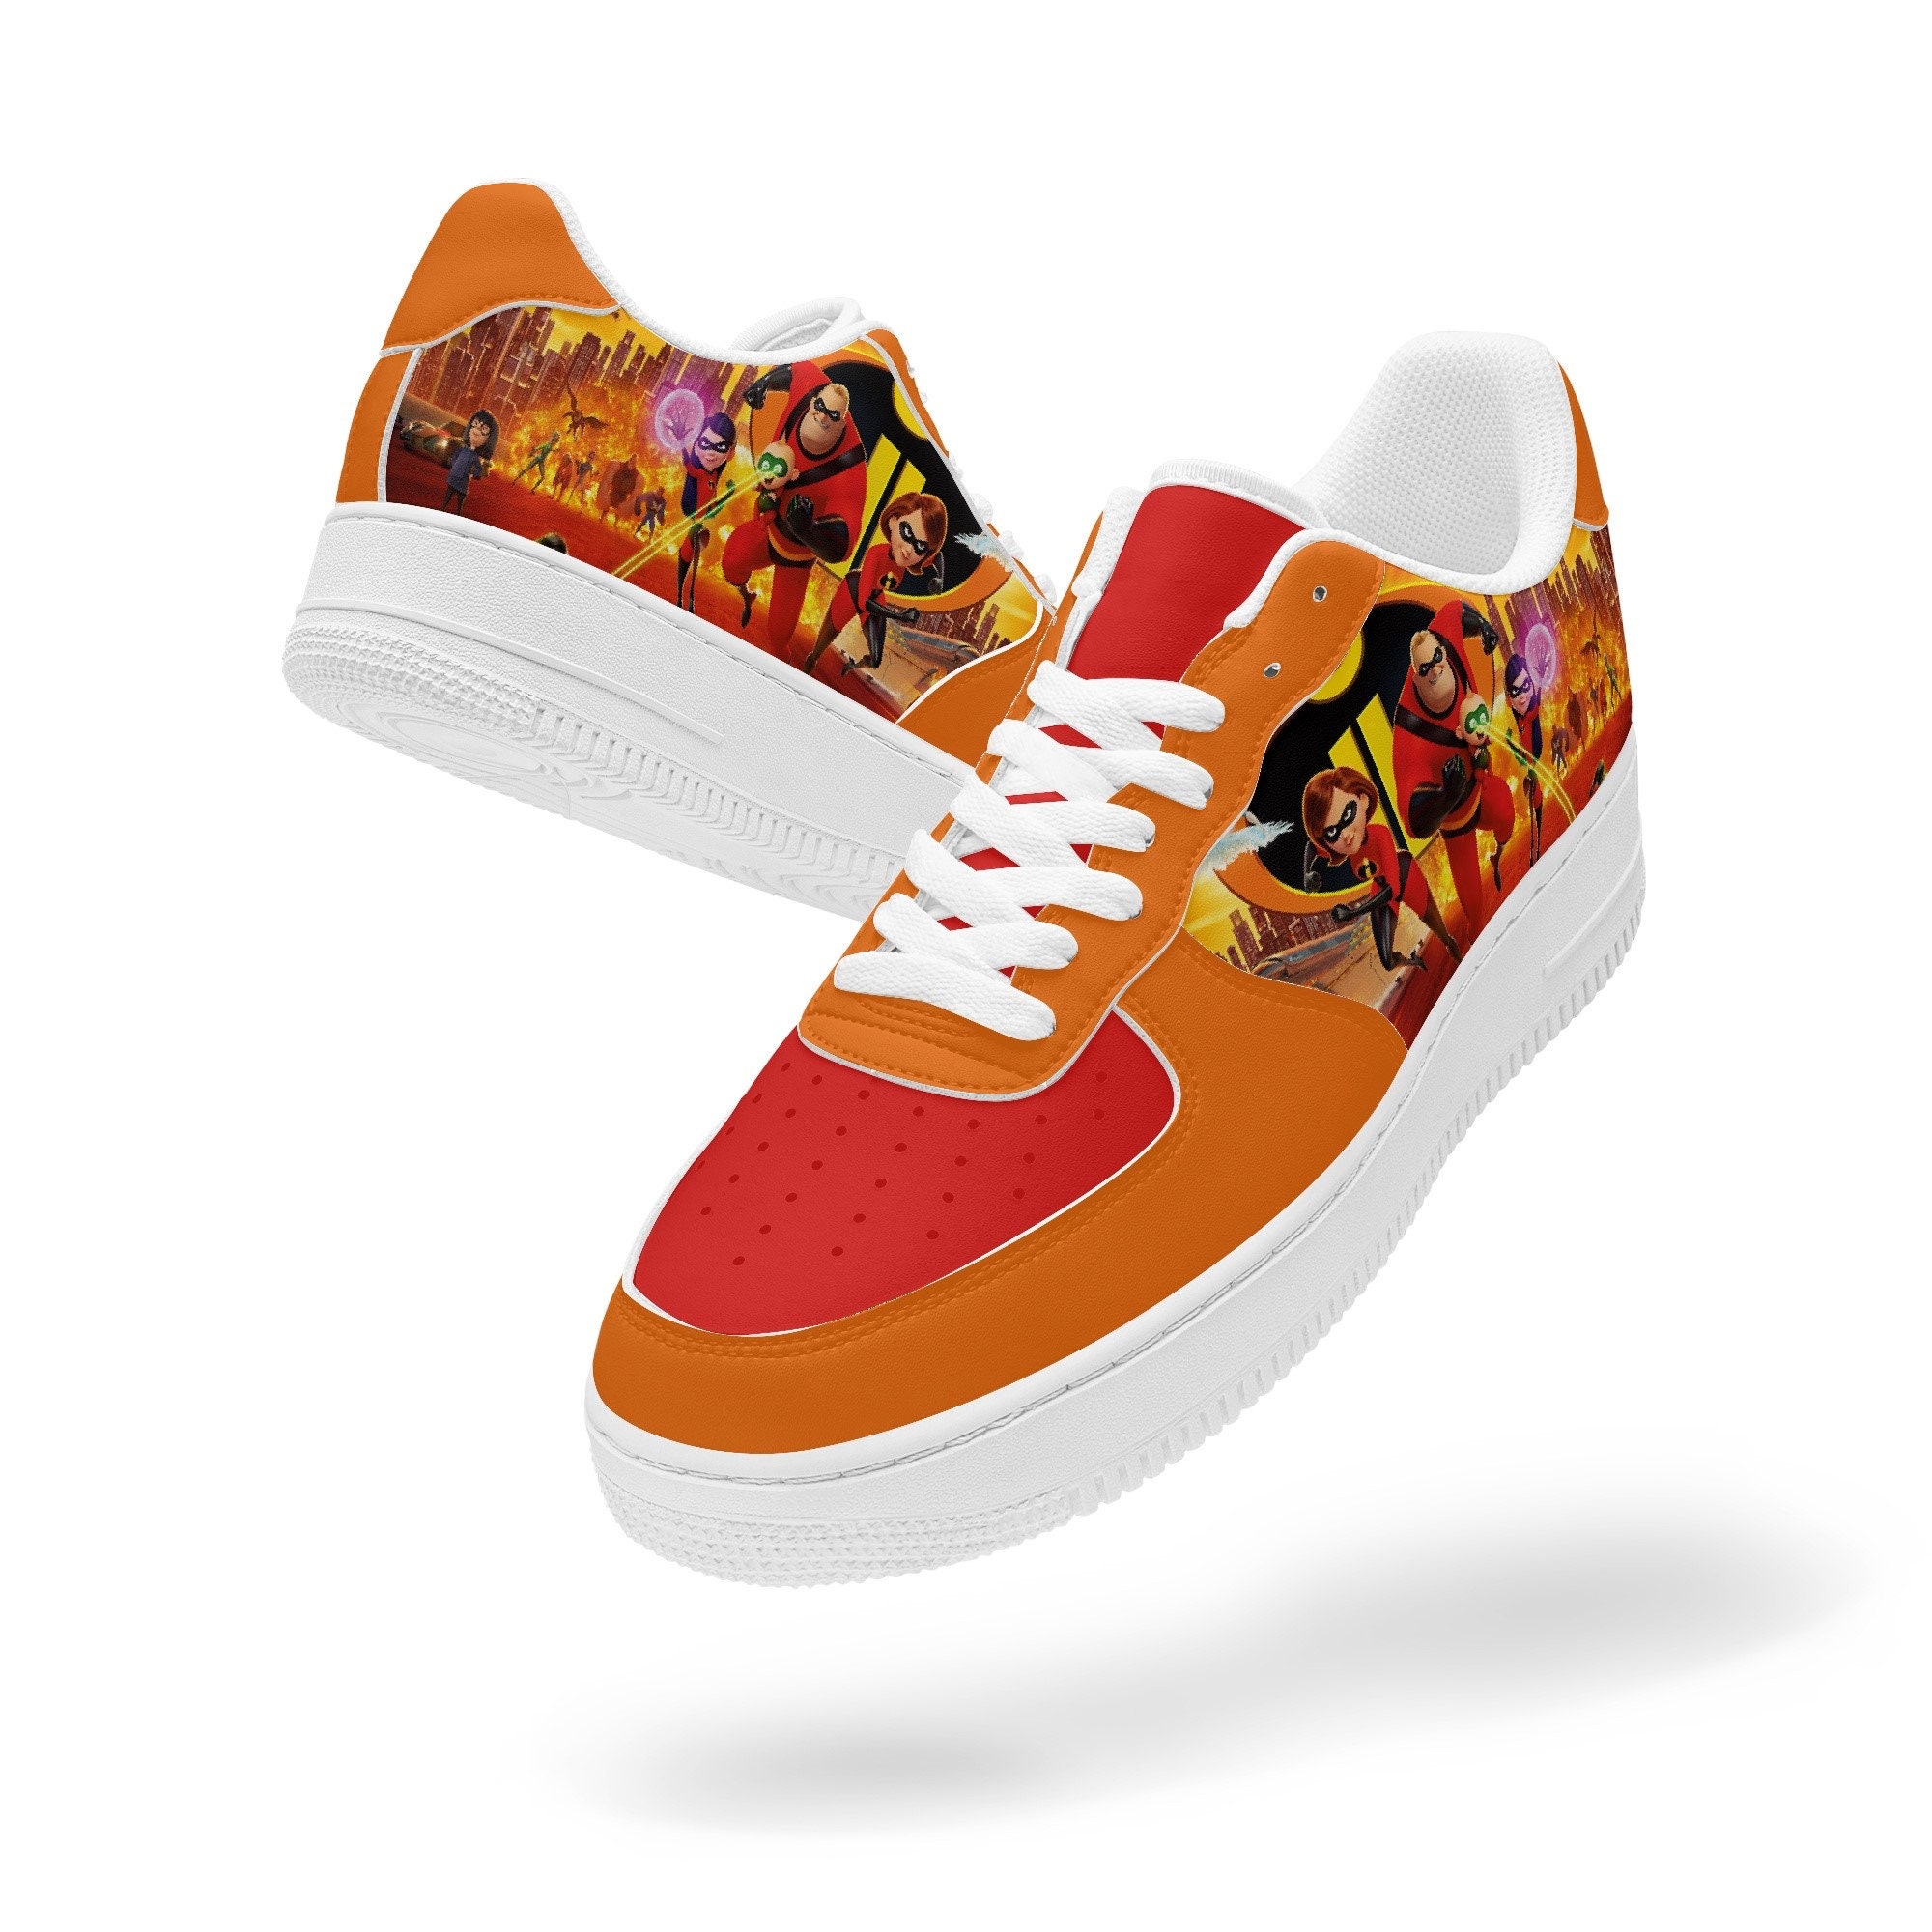 Incredibles Shoes - Etsy